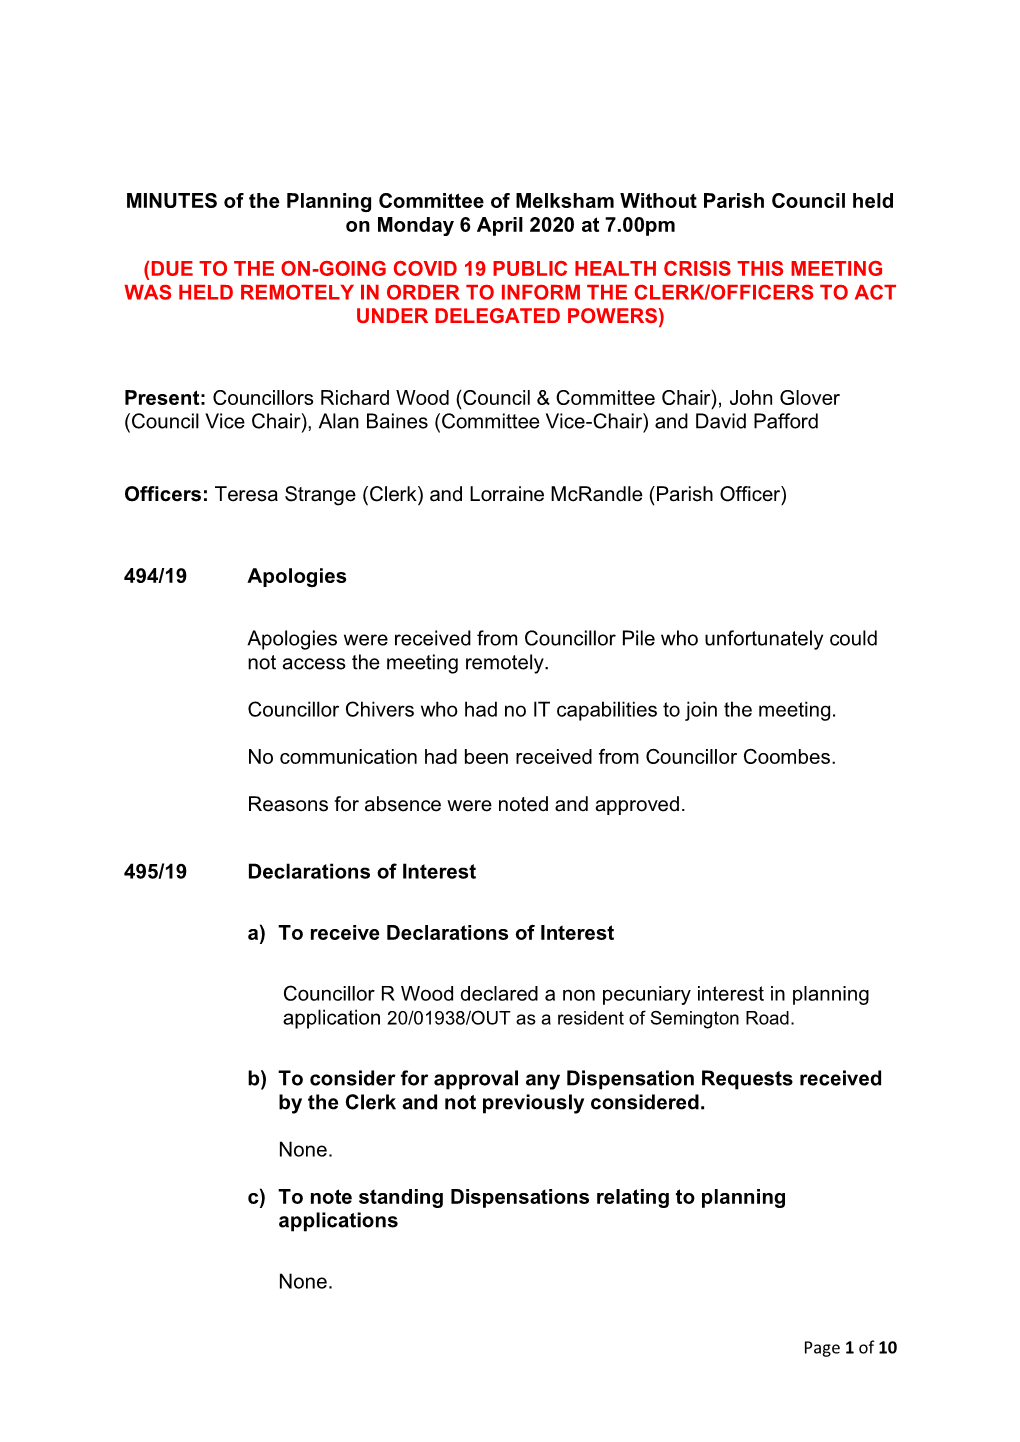 MINUTES of the Planning Committee of Melksham Without Parish Council Held on Monday 6 April 2020 at 7.00Pm